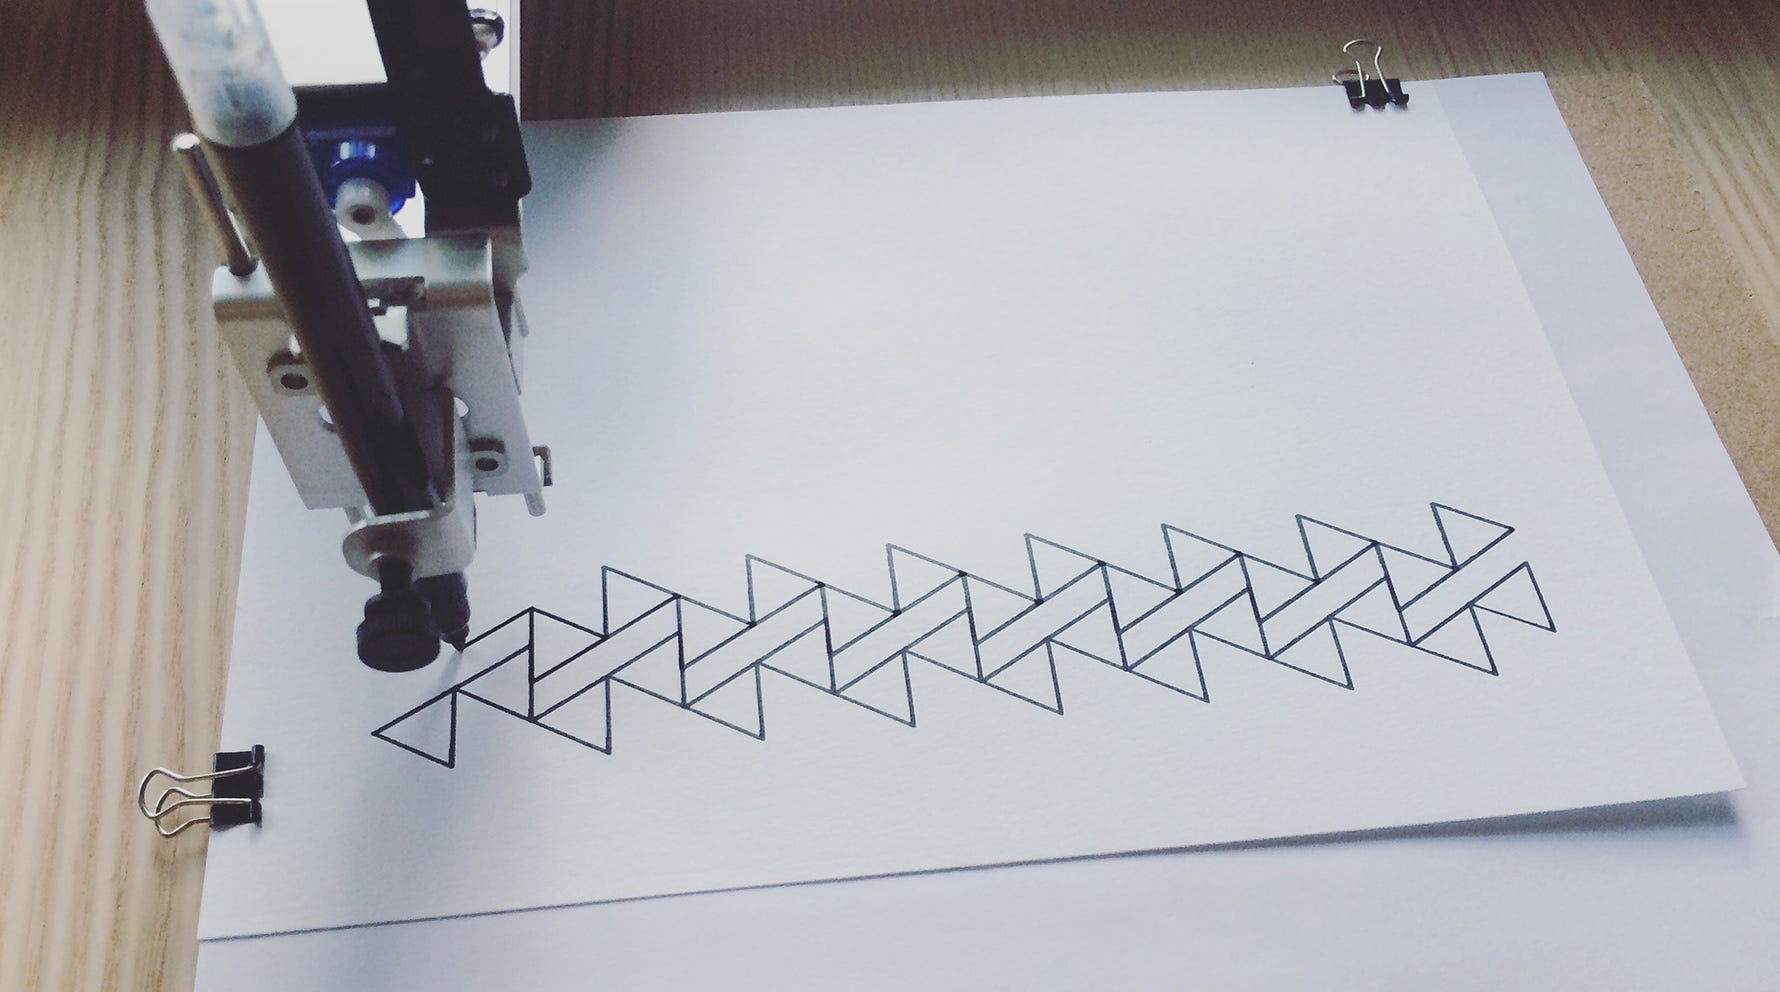 Photograph of a pen plotter by Matt Deslauriers. The image shows a pen plotter drawing interesting patterns with triangles.